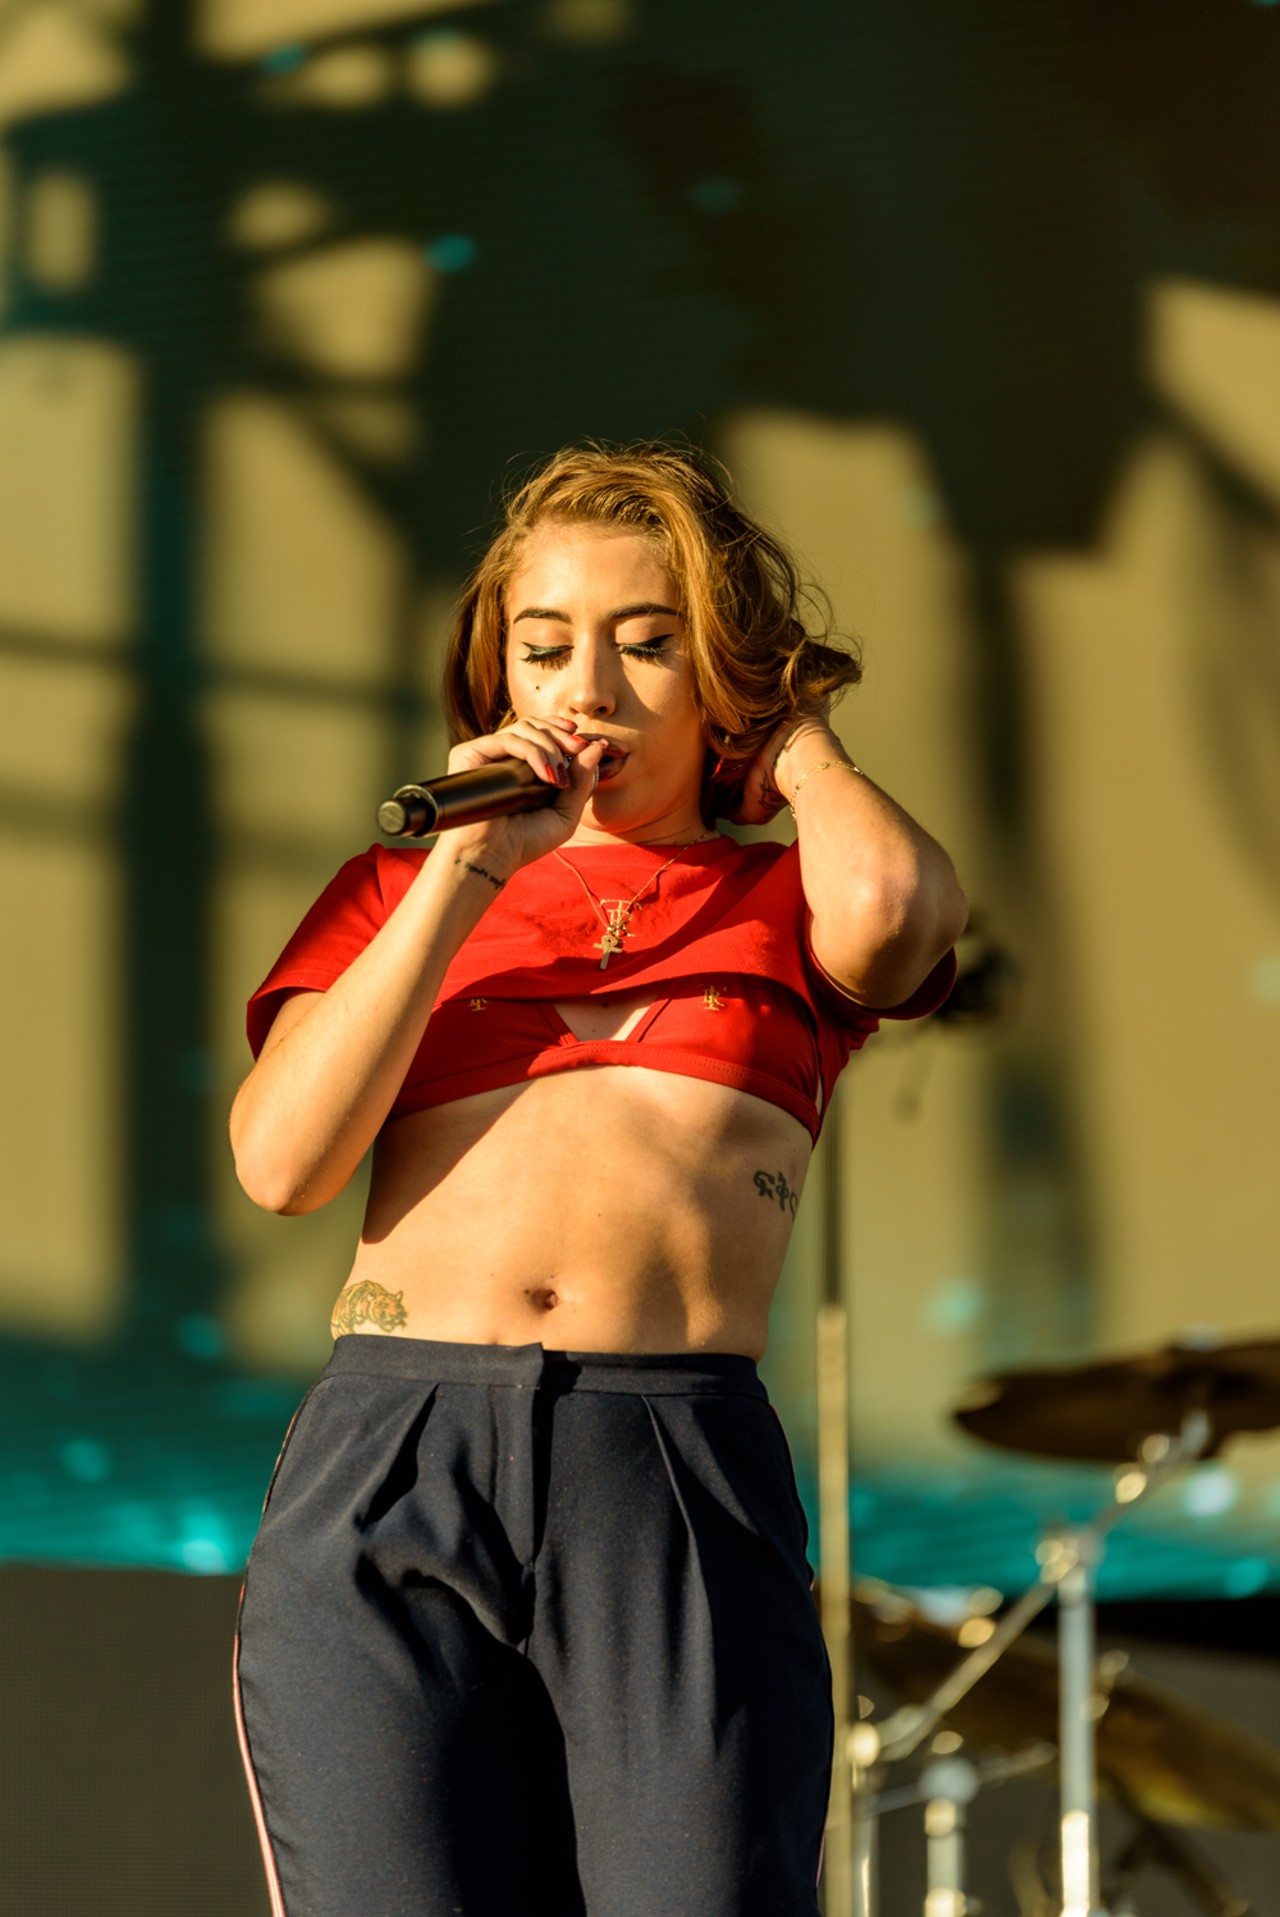 From landing on respective features with Snoop Dogg and Gorillaz, to touring with soulful singer songwriter Leon Bridges, Colombian-American singer Kali Uchis is carving her place in the corridors of R&B and indie pop.